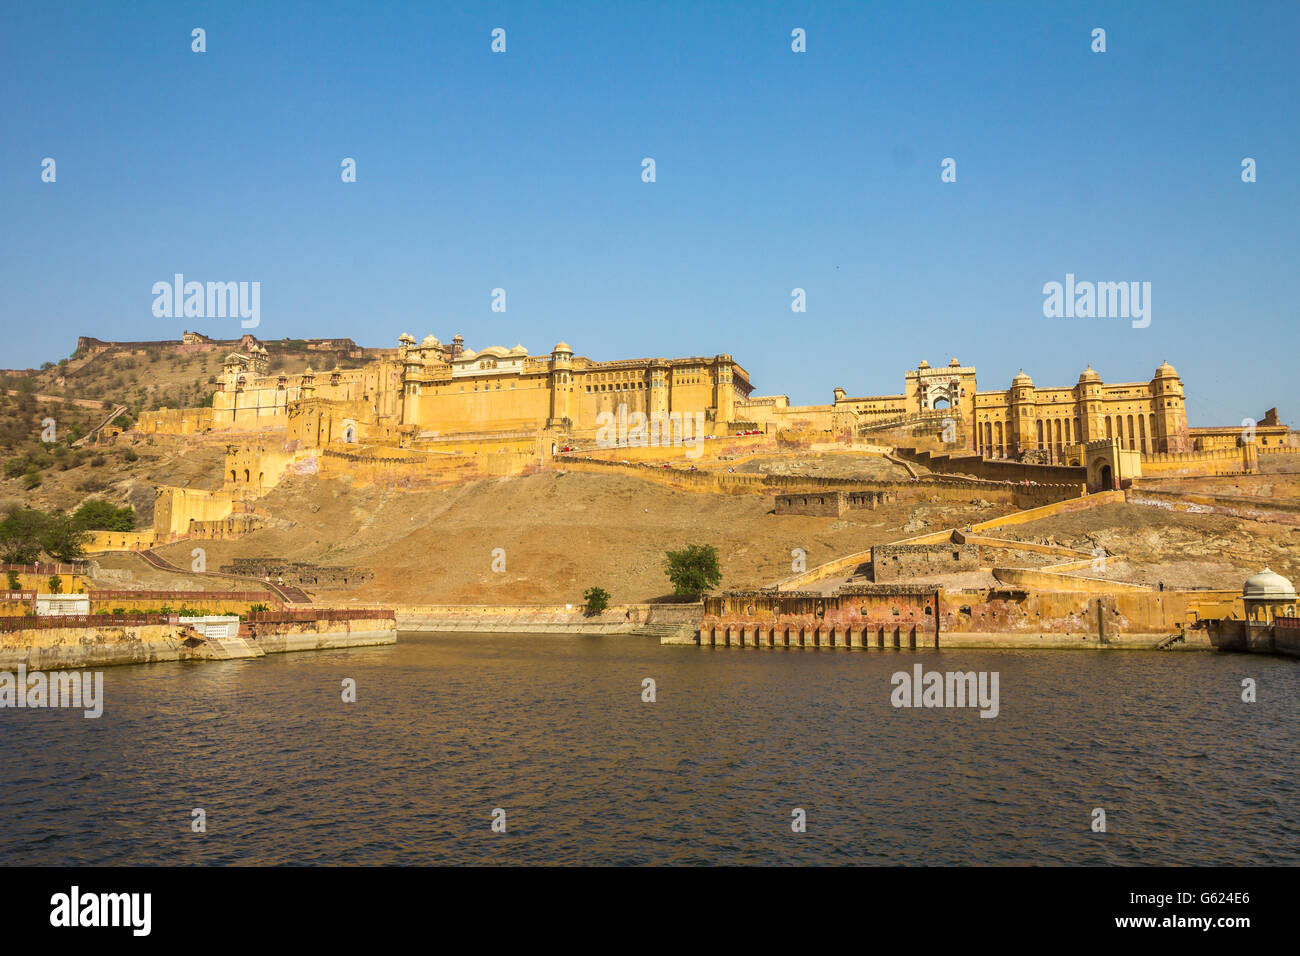 Amer fort in Jaipur India Stock Photo